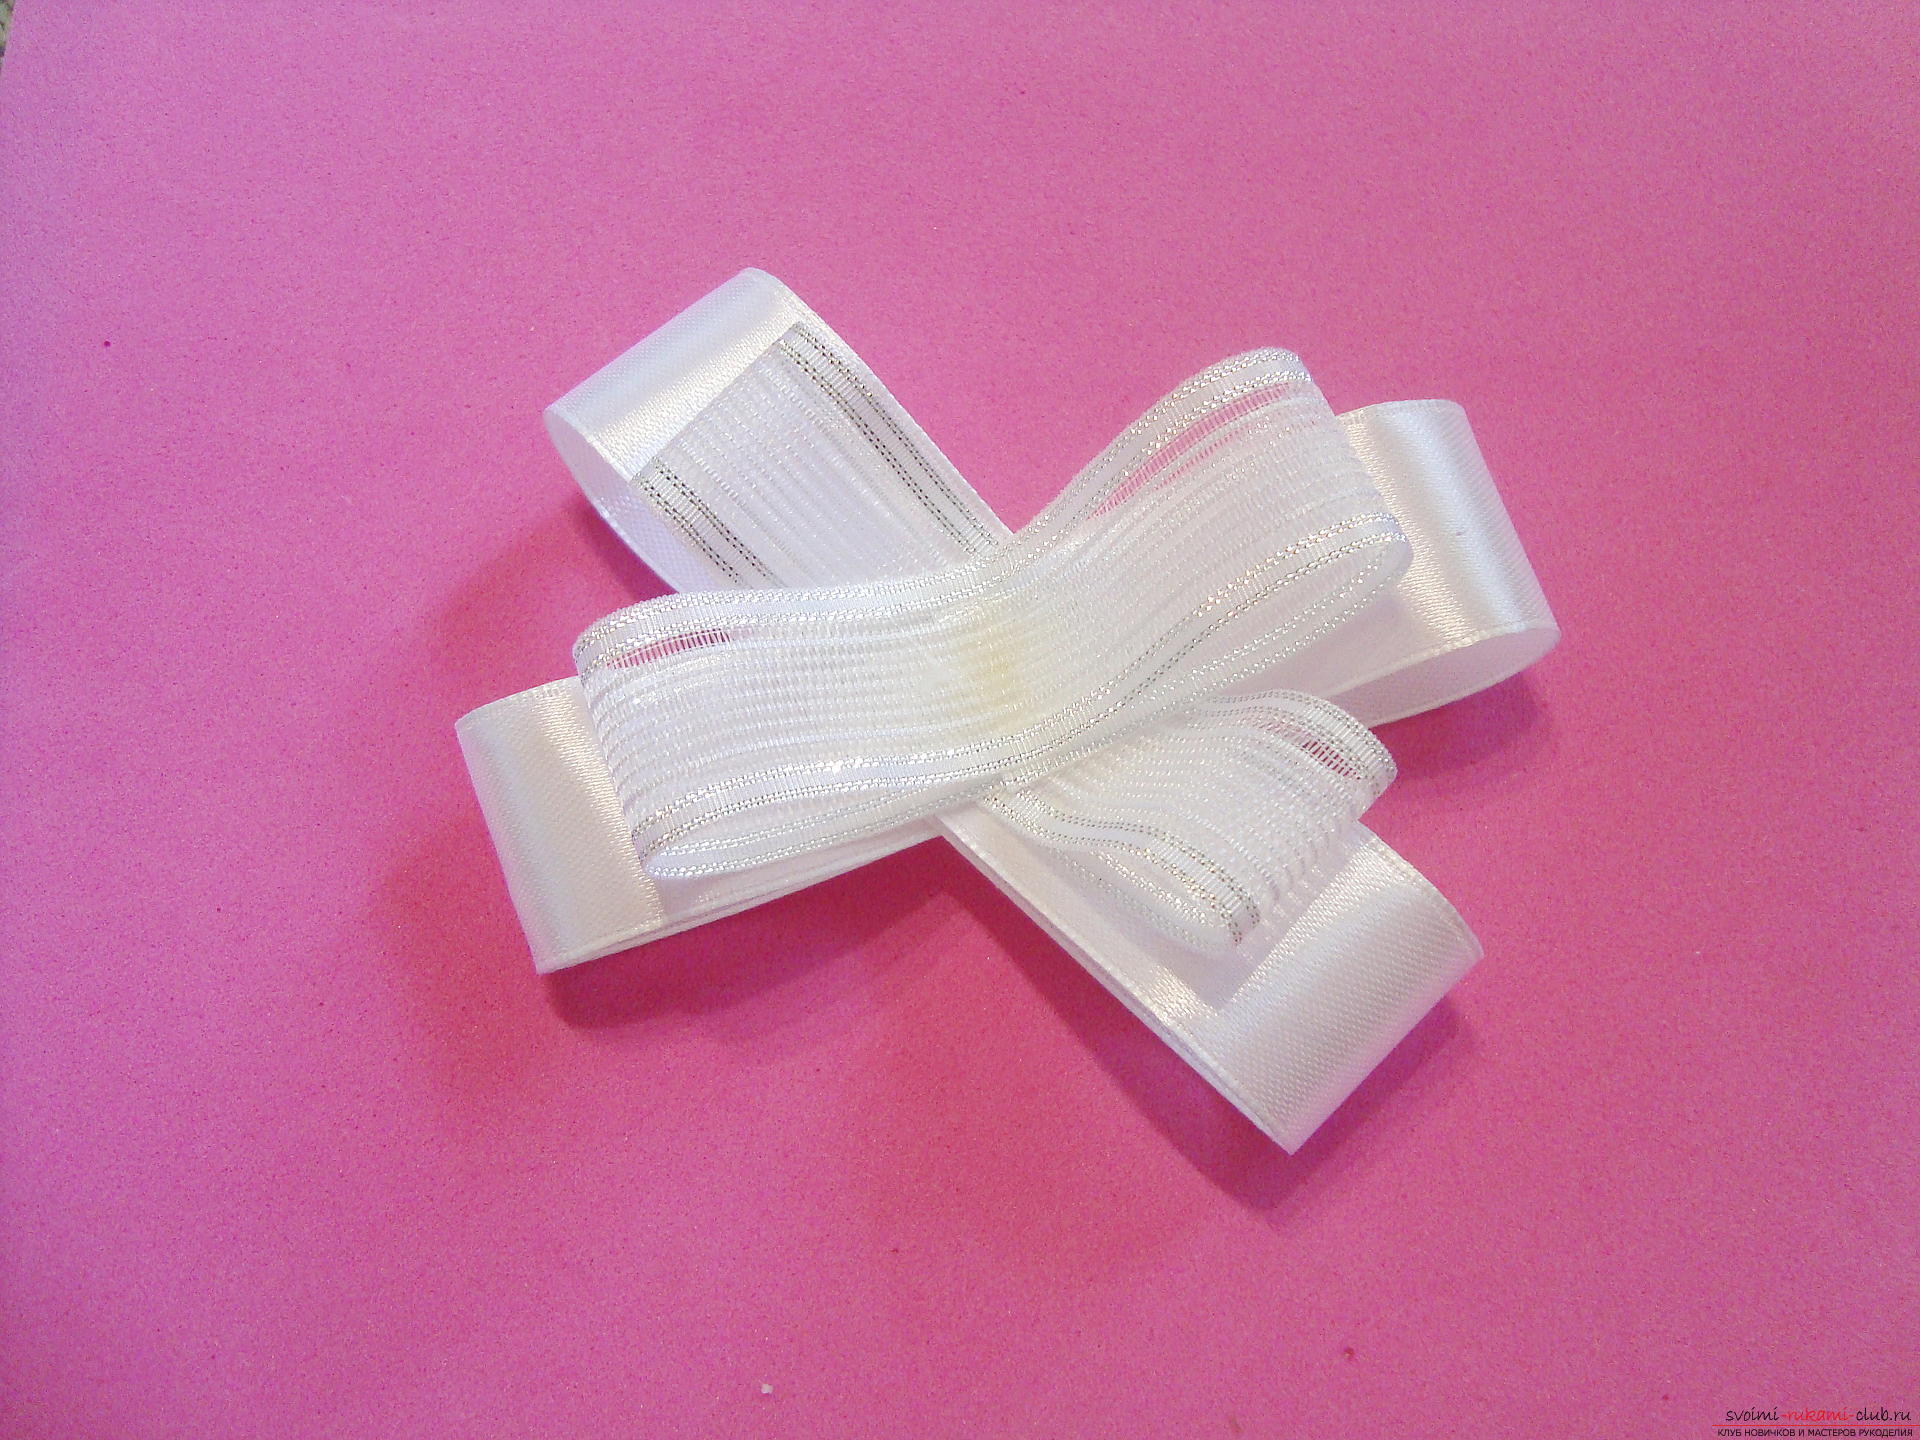 Step-by-step guide to making bows by September 1 for schoolgirls describing the steps and photos. Photo Number 14